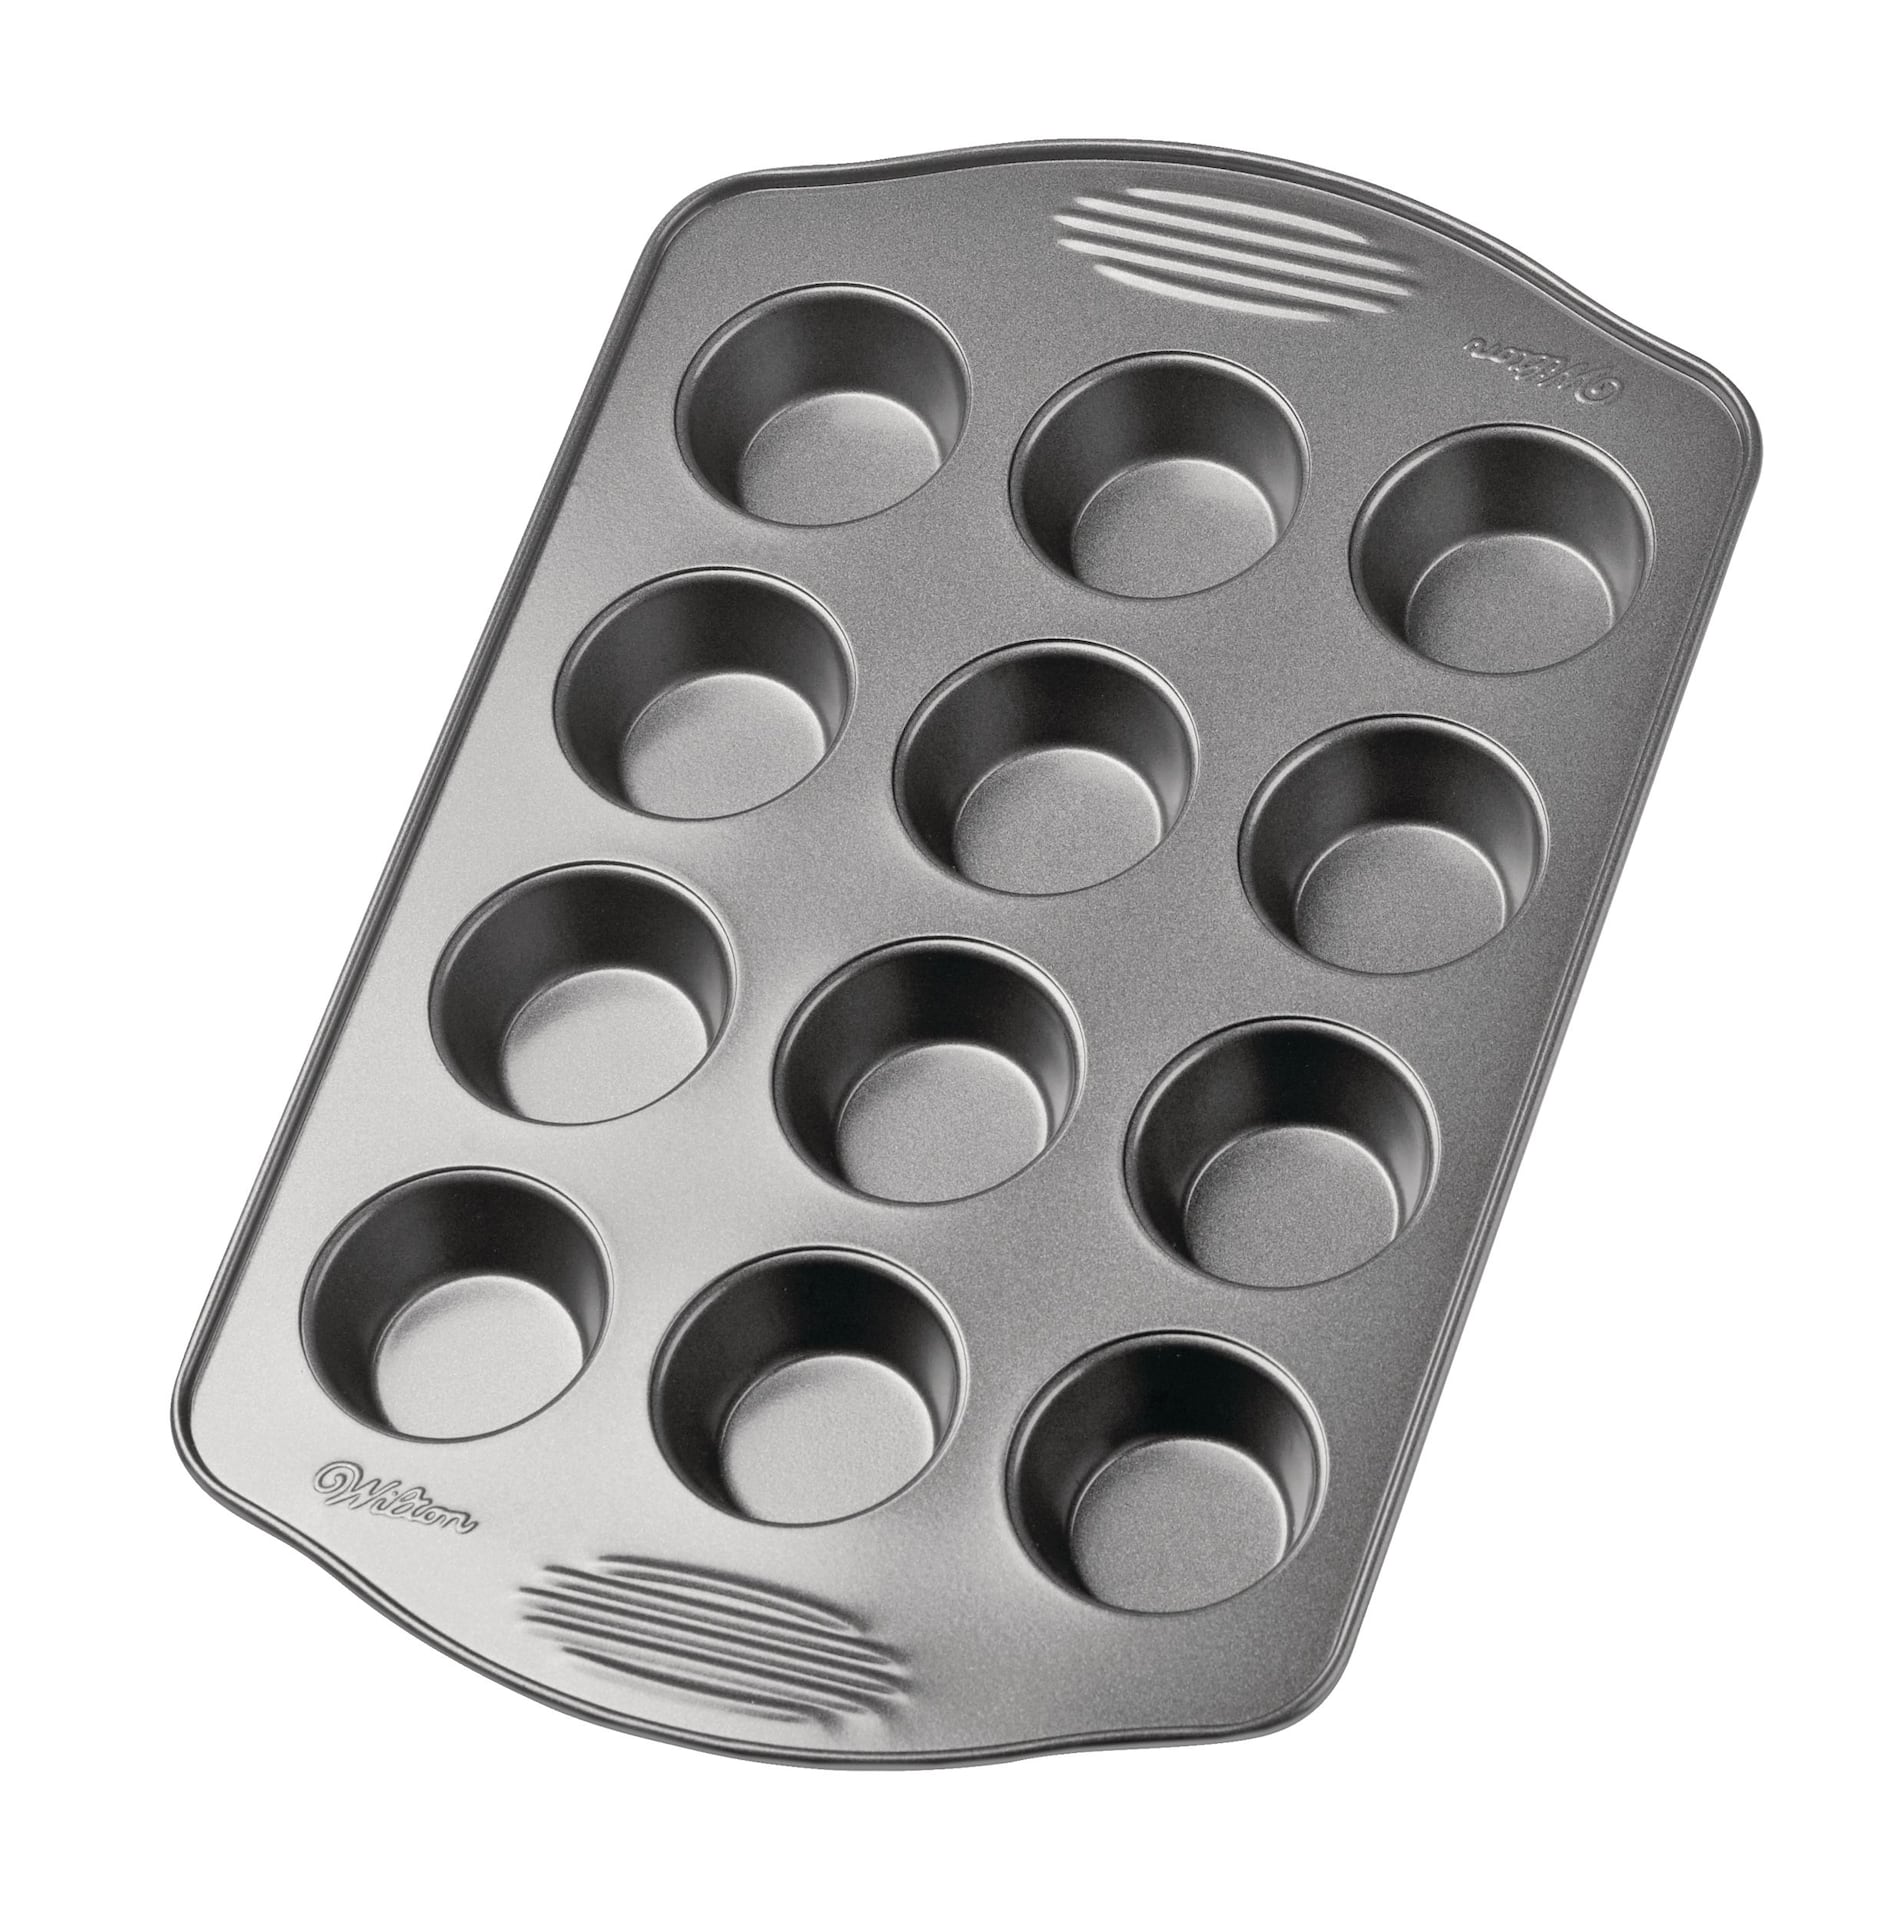 https://media-www.canadiantire.ca/product/living/kitchen/bakeware-baking-prep/0420517/wilton-gourmet-choice-muffin-12-cup-01f970c7-d53d-4bf8-a61b-3006c0152e82-jpgrendition.jpg